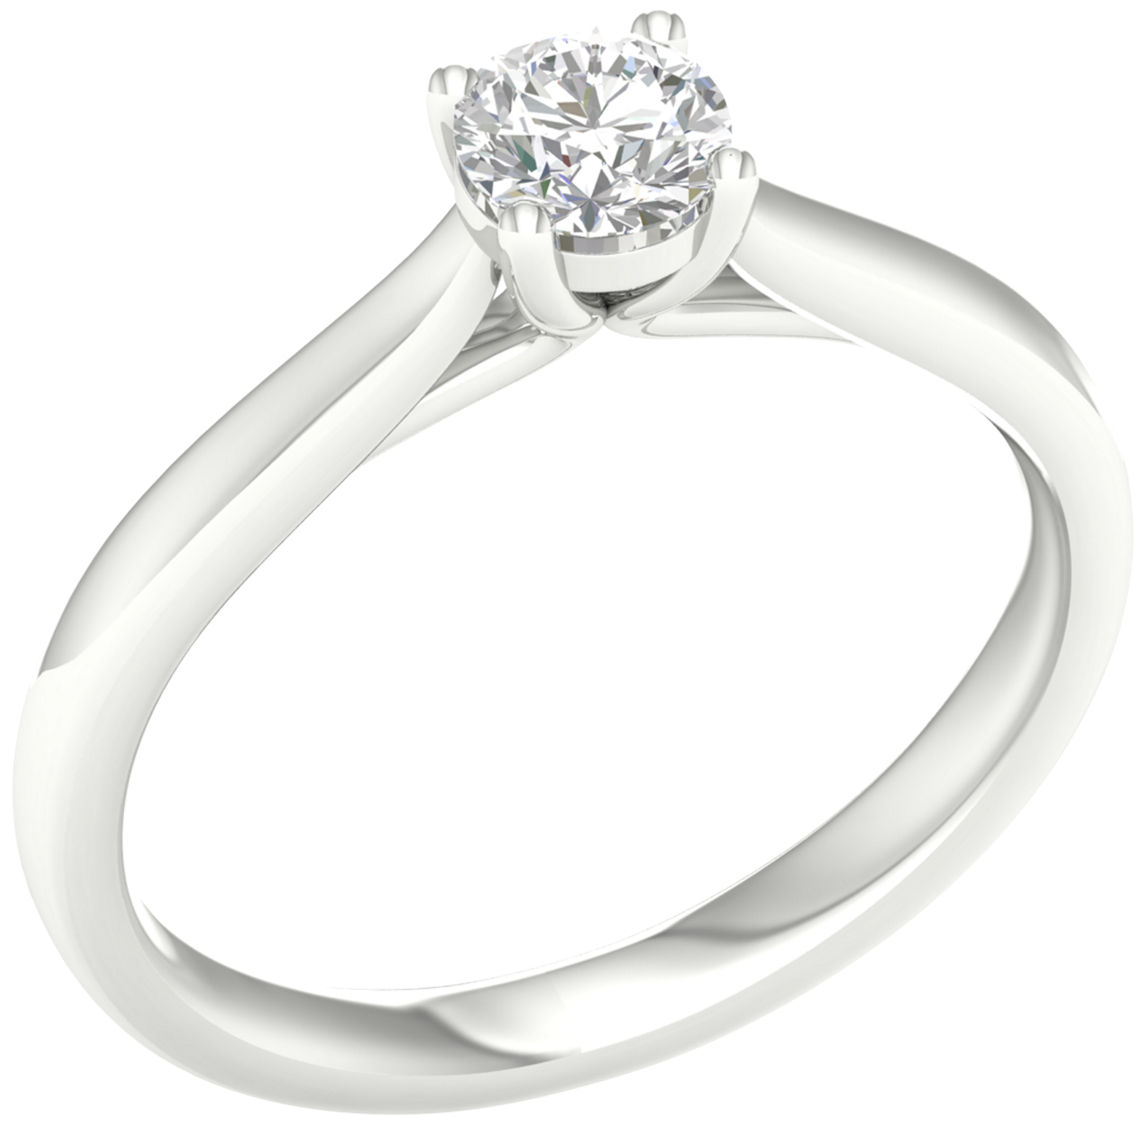 Pure Brilliance 14K White Gold 1/2 CTW Oval Solitaire Ring with IGI Certification - Image 2 of 2